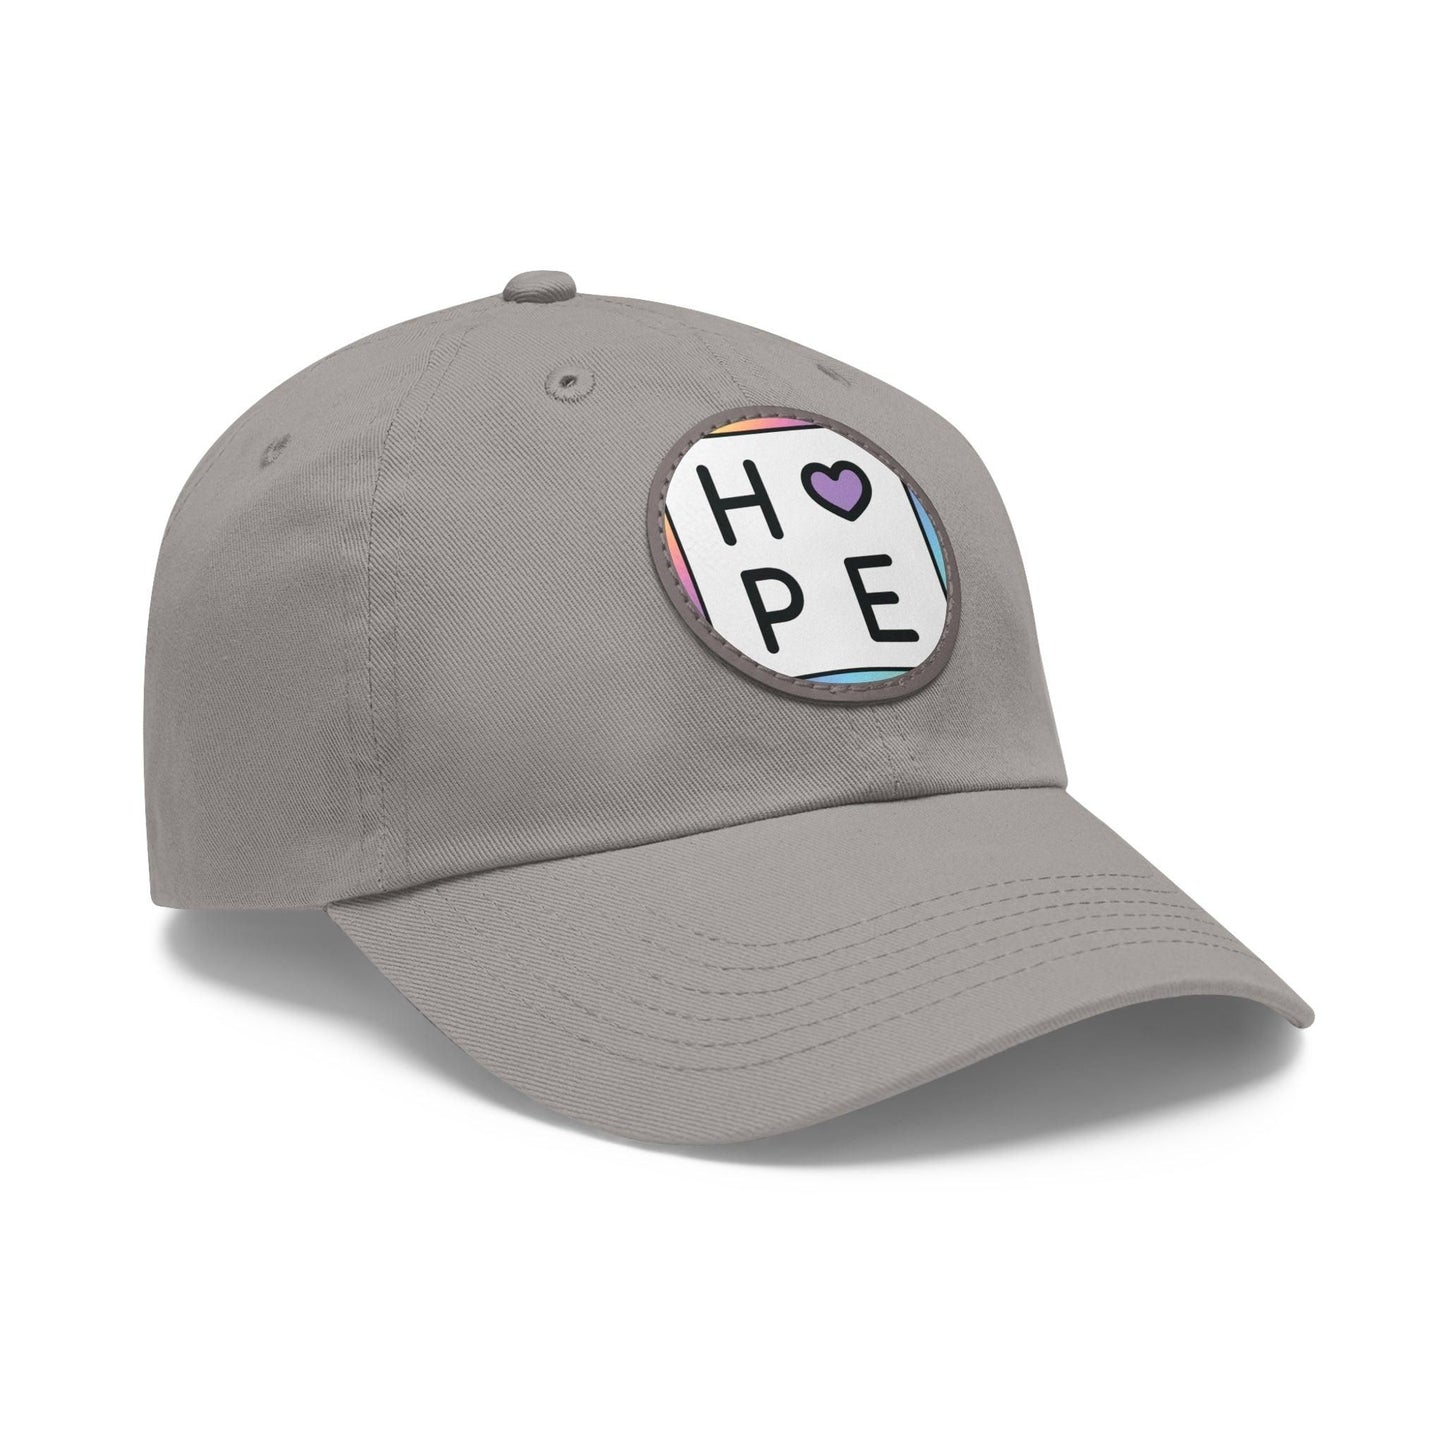 Hope Baseball Cap with Leather Patch Cap Grey / Grey patch Circle One size